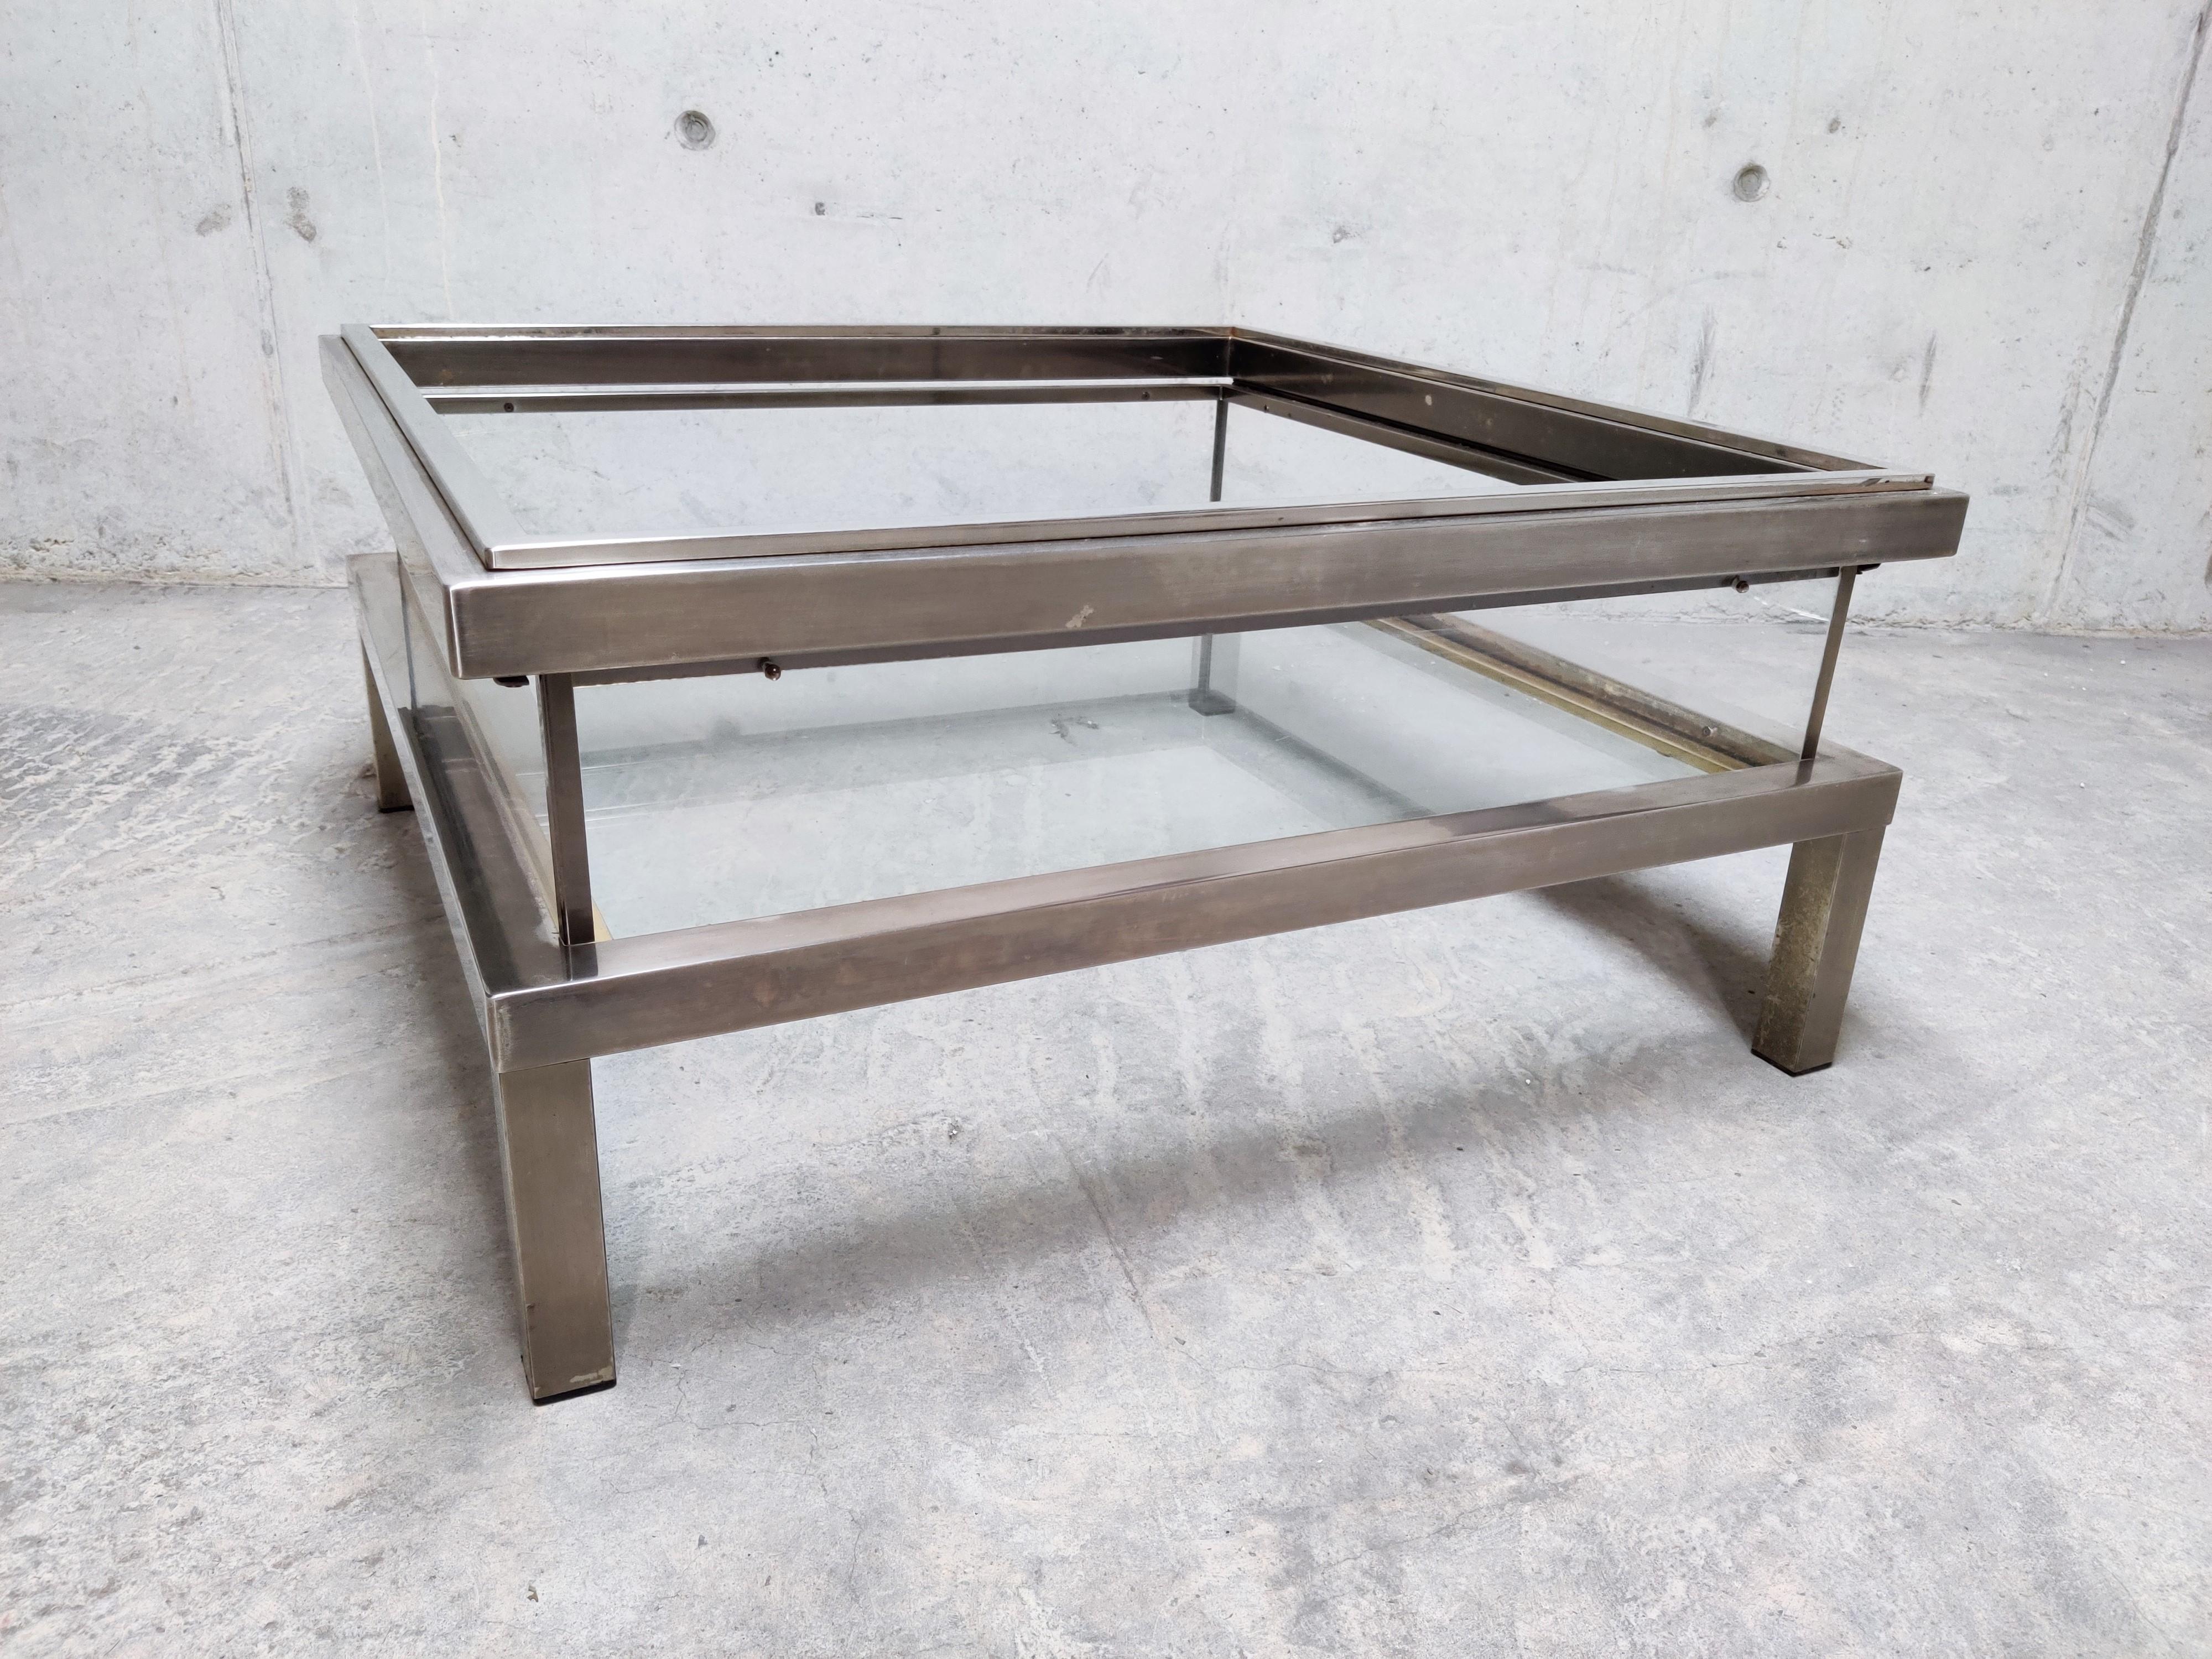 Vintage chrome and brass coffee table with a sliding glass top.

This luxurious coffee table is made from heavy quality chromed metal and glass.

It is ideal to display curio and store magazines.

Used condition

1970s -